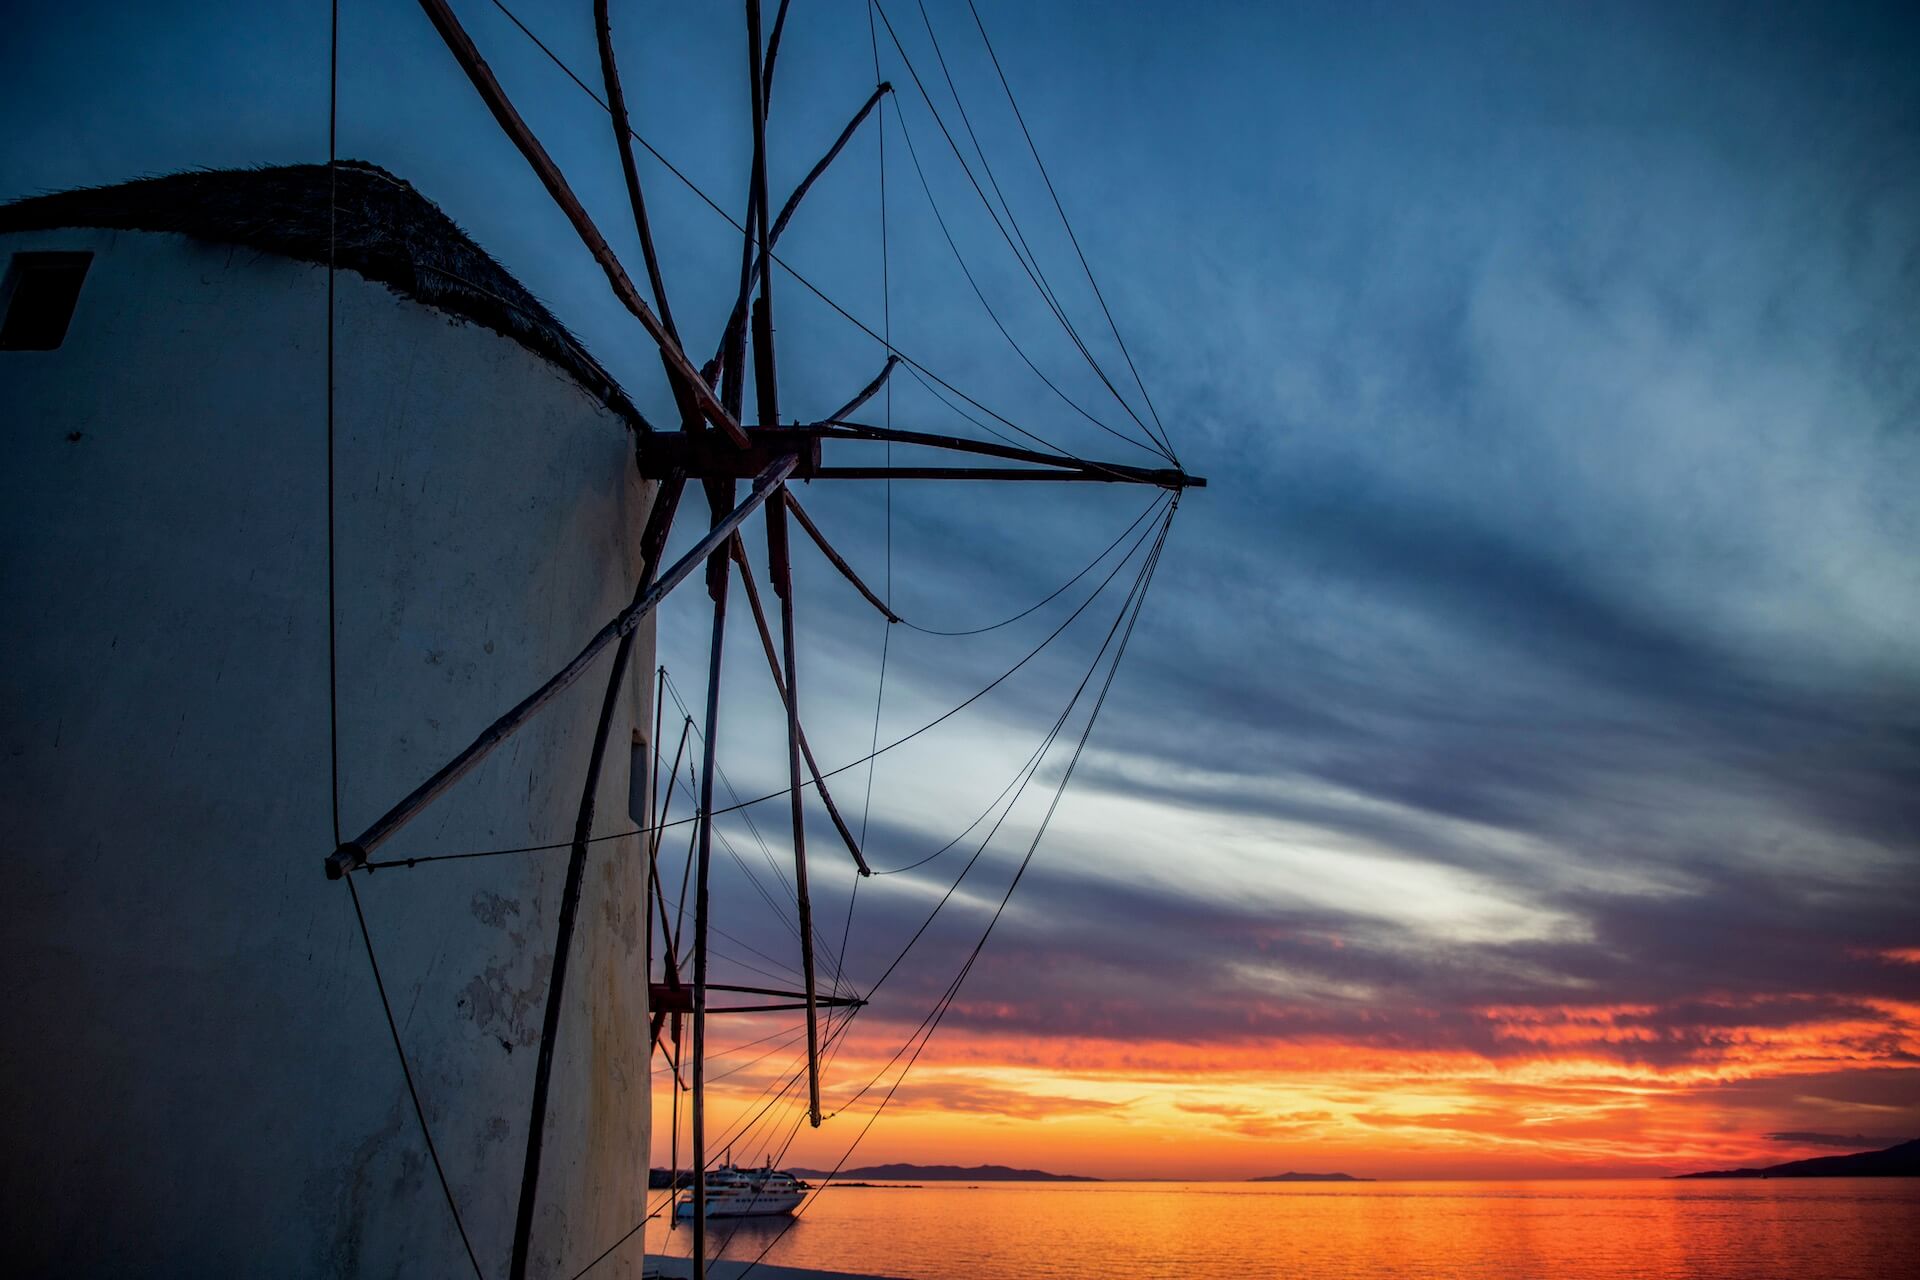 Sunset over a windmill